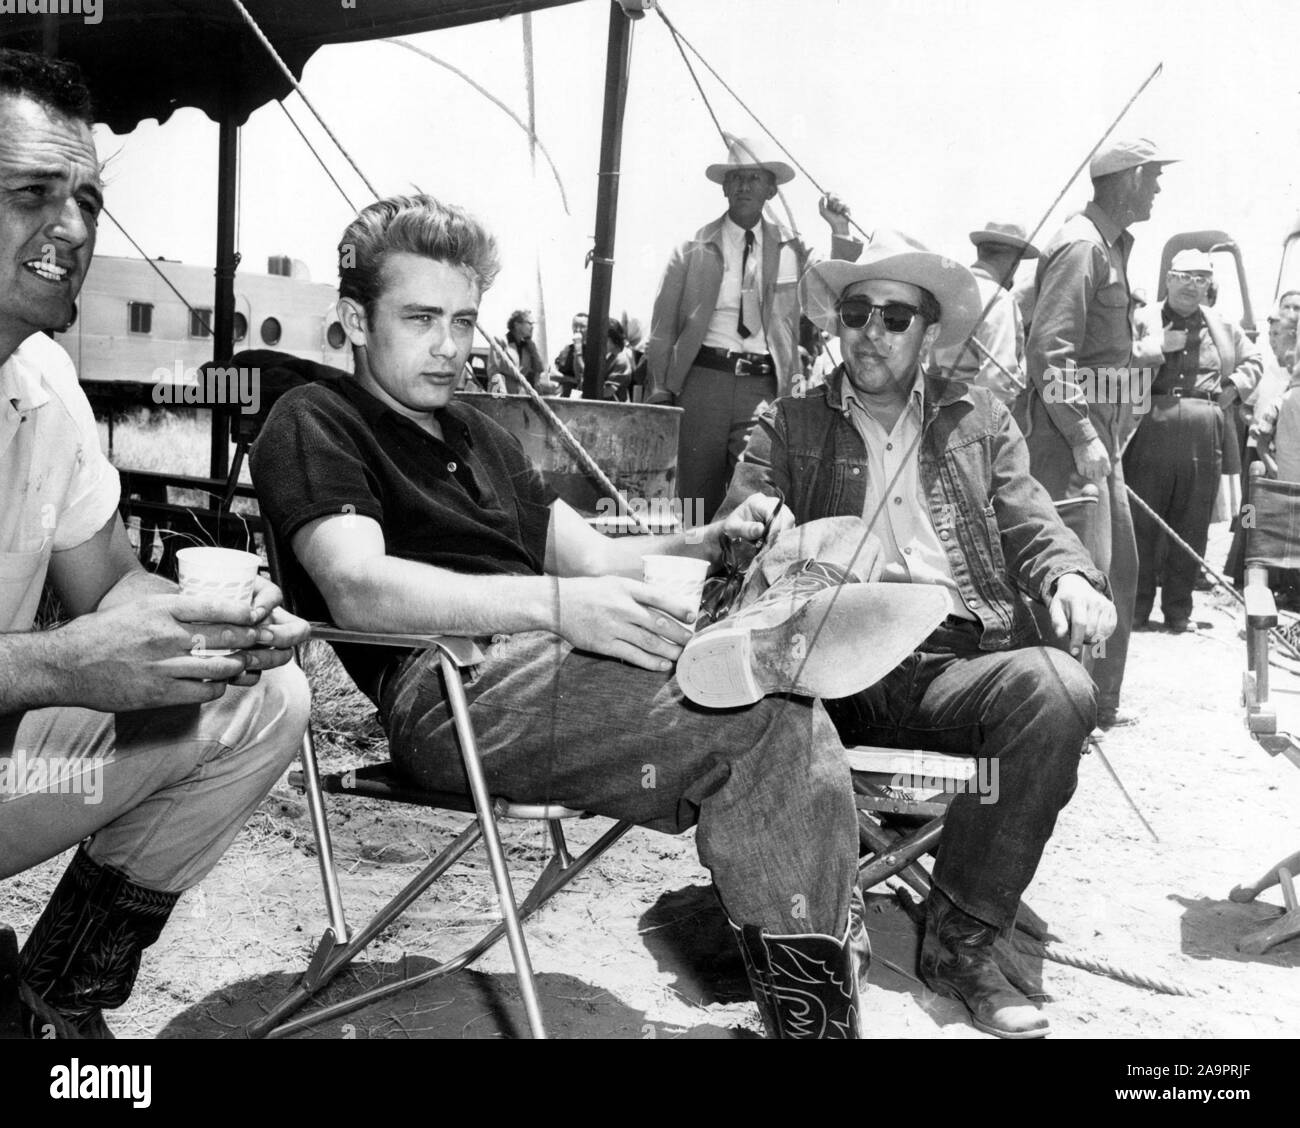 JAMES DEAN in GIANT (1956), directed by GEORGE STEVENS. Credit: WARNER BROTHERS / Album Stock Photo